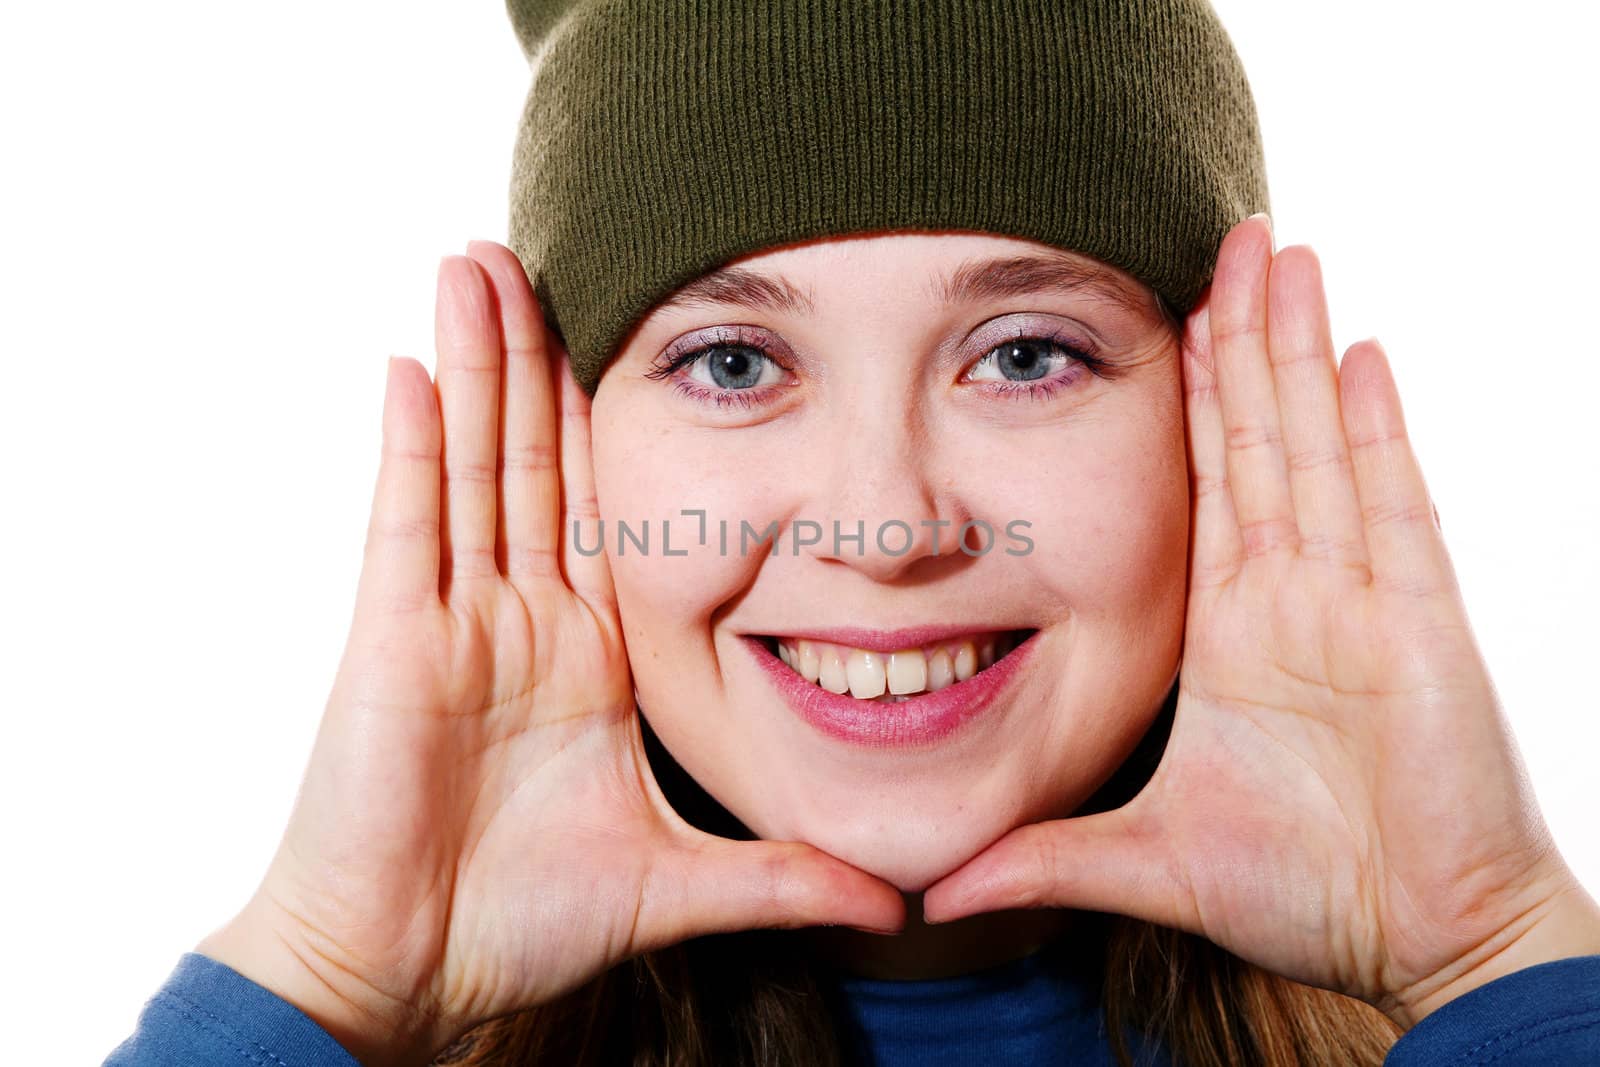 An image of a girl in a green hat